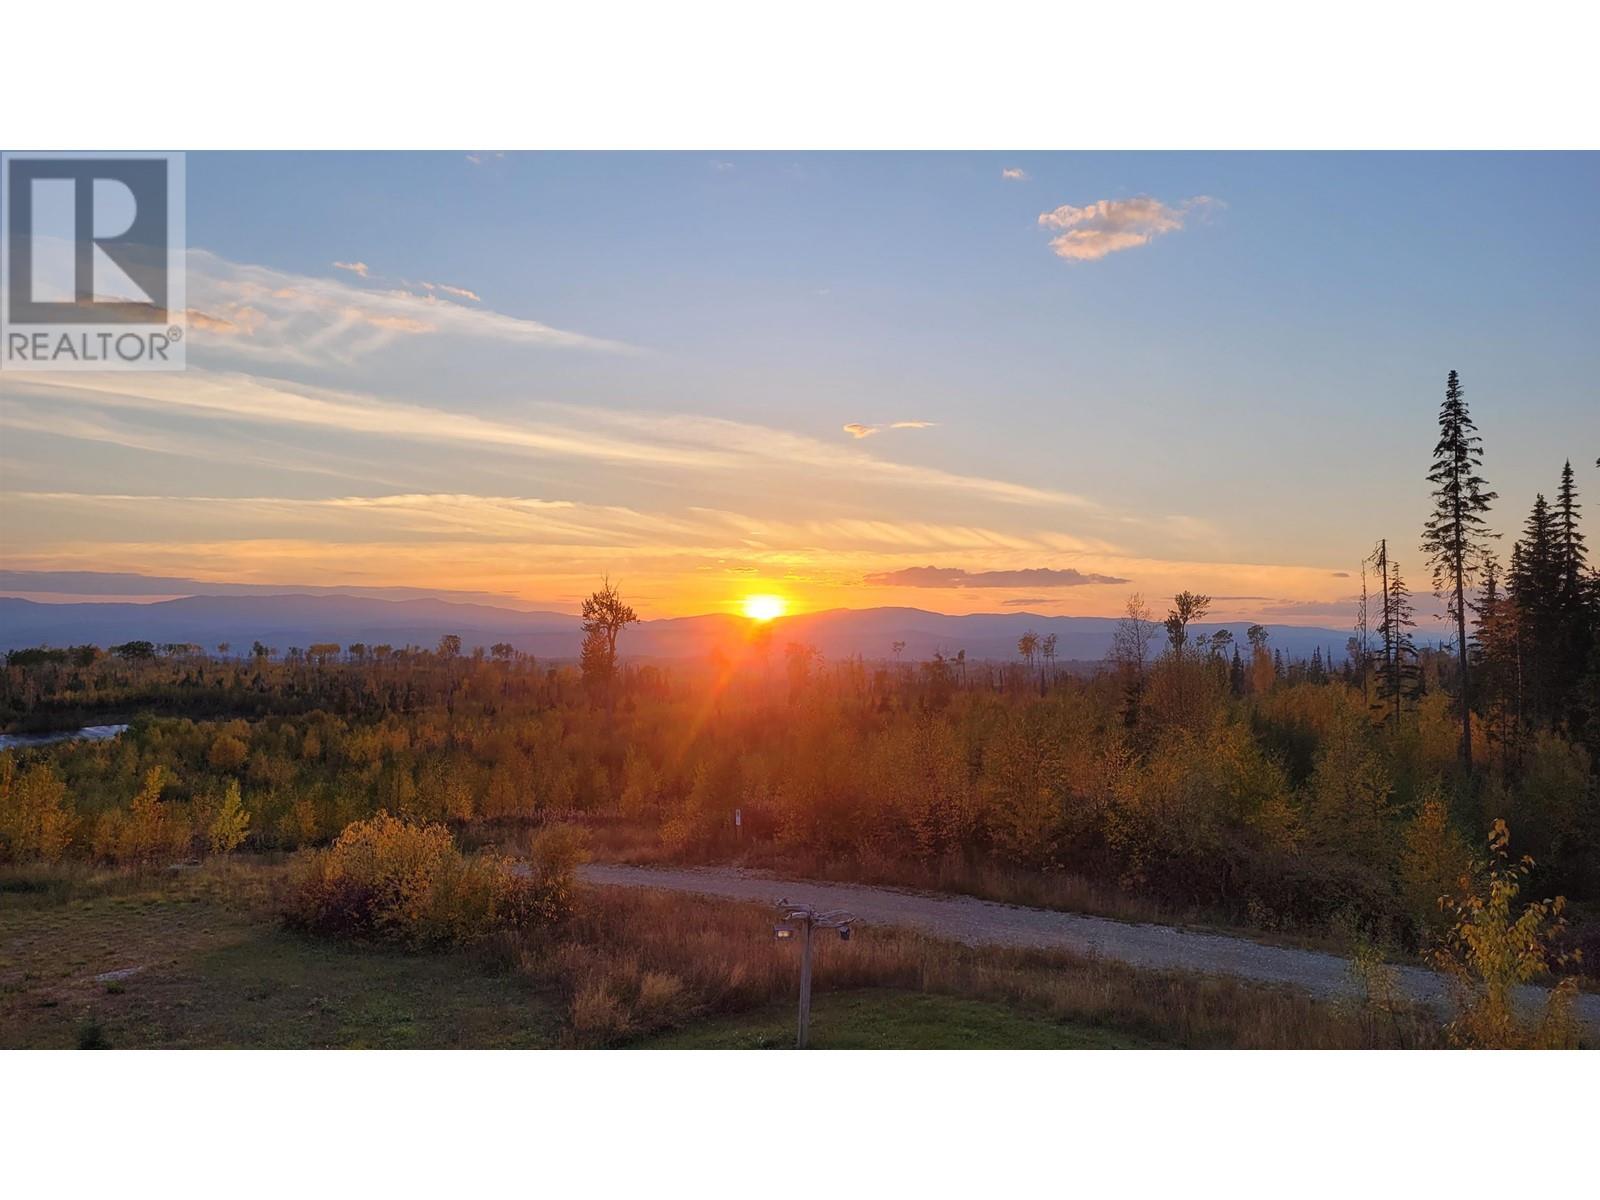 LOT 16 BELL PLACE located in Mackenzie, British Columbia